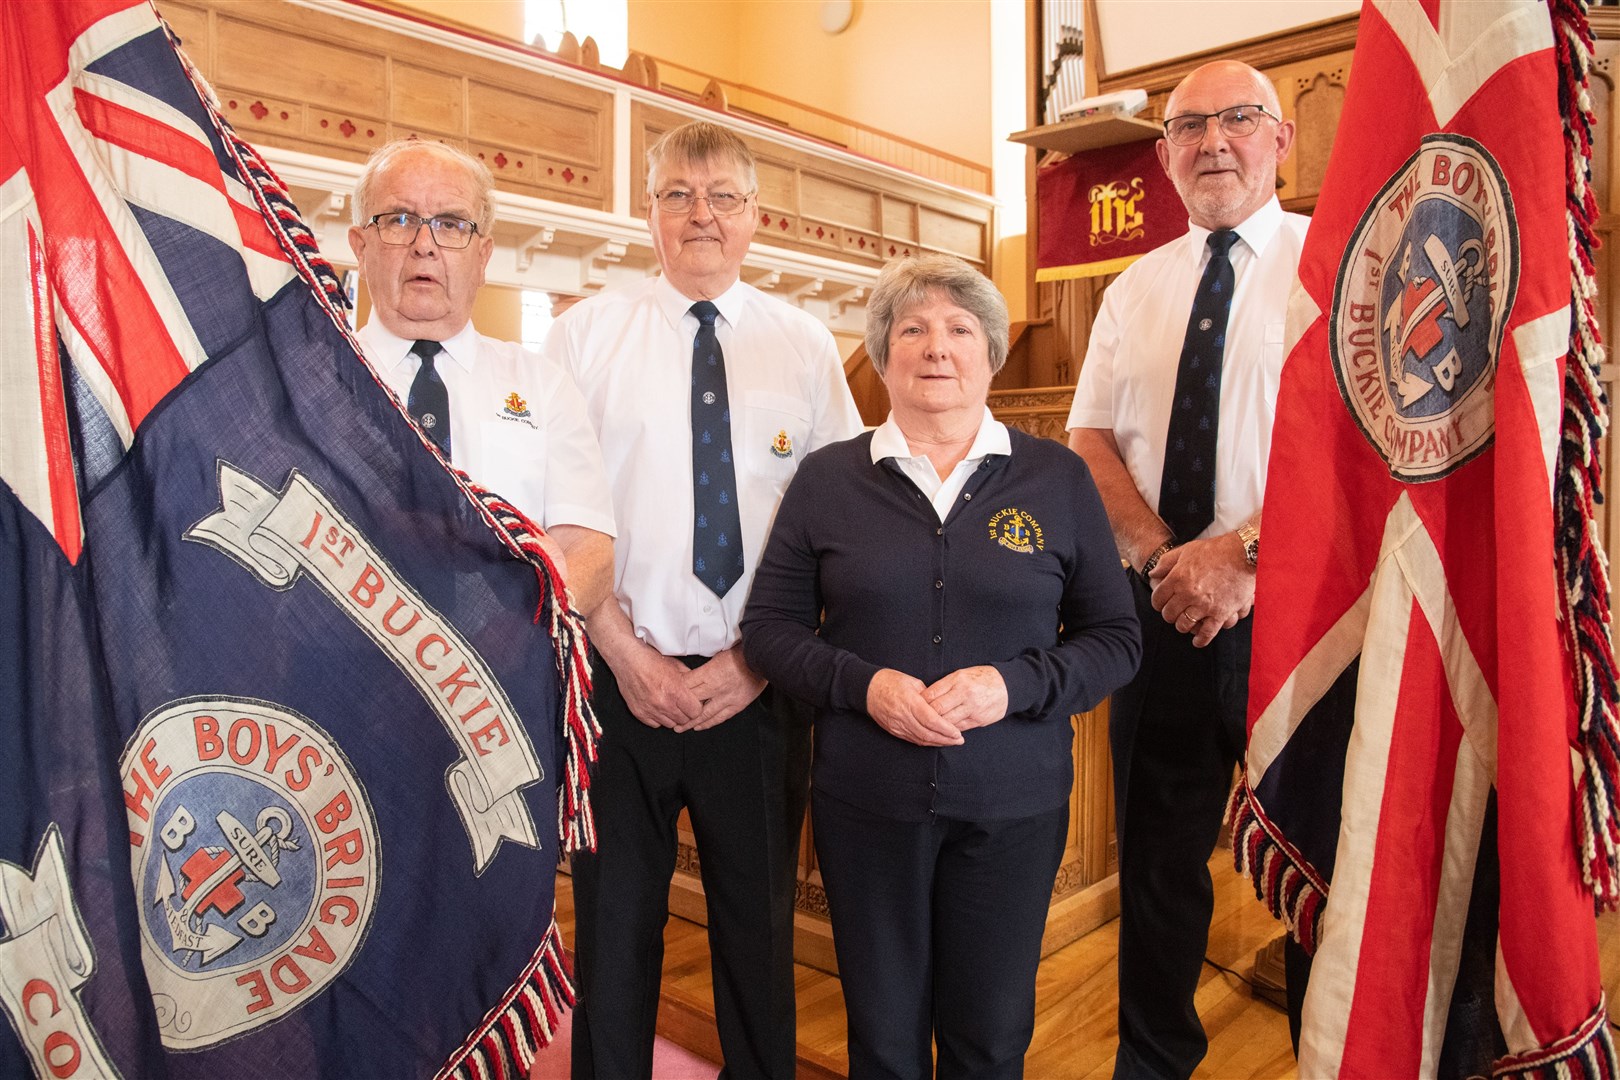 1st Buckie Company Boys' Brigade Captain Alan McIntosh (second left) is joined by fellow officers Gordon Pirie (left), Jennifer McIntosh and Grant Stewart in celebrating the group's Queen's Award for Voluntary Service. Picture: Daniel Forsyth